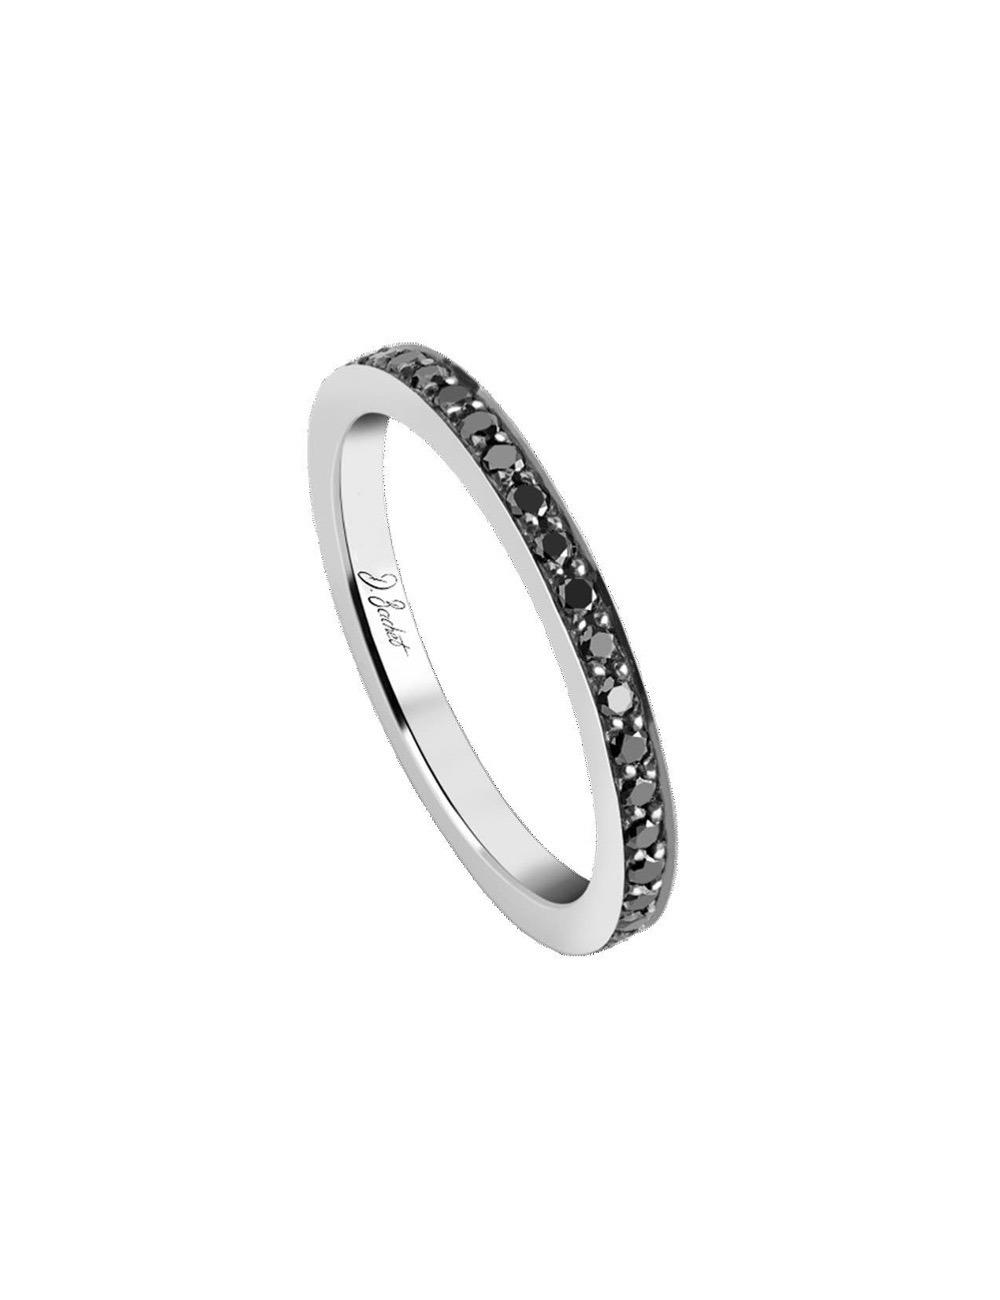 Platinum wedding band for women, adorned with sparkling black diamonds all around the ring, elegantly reflecting light.